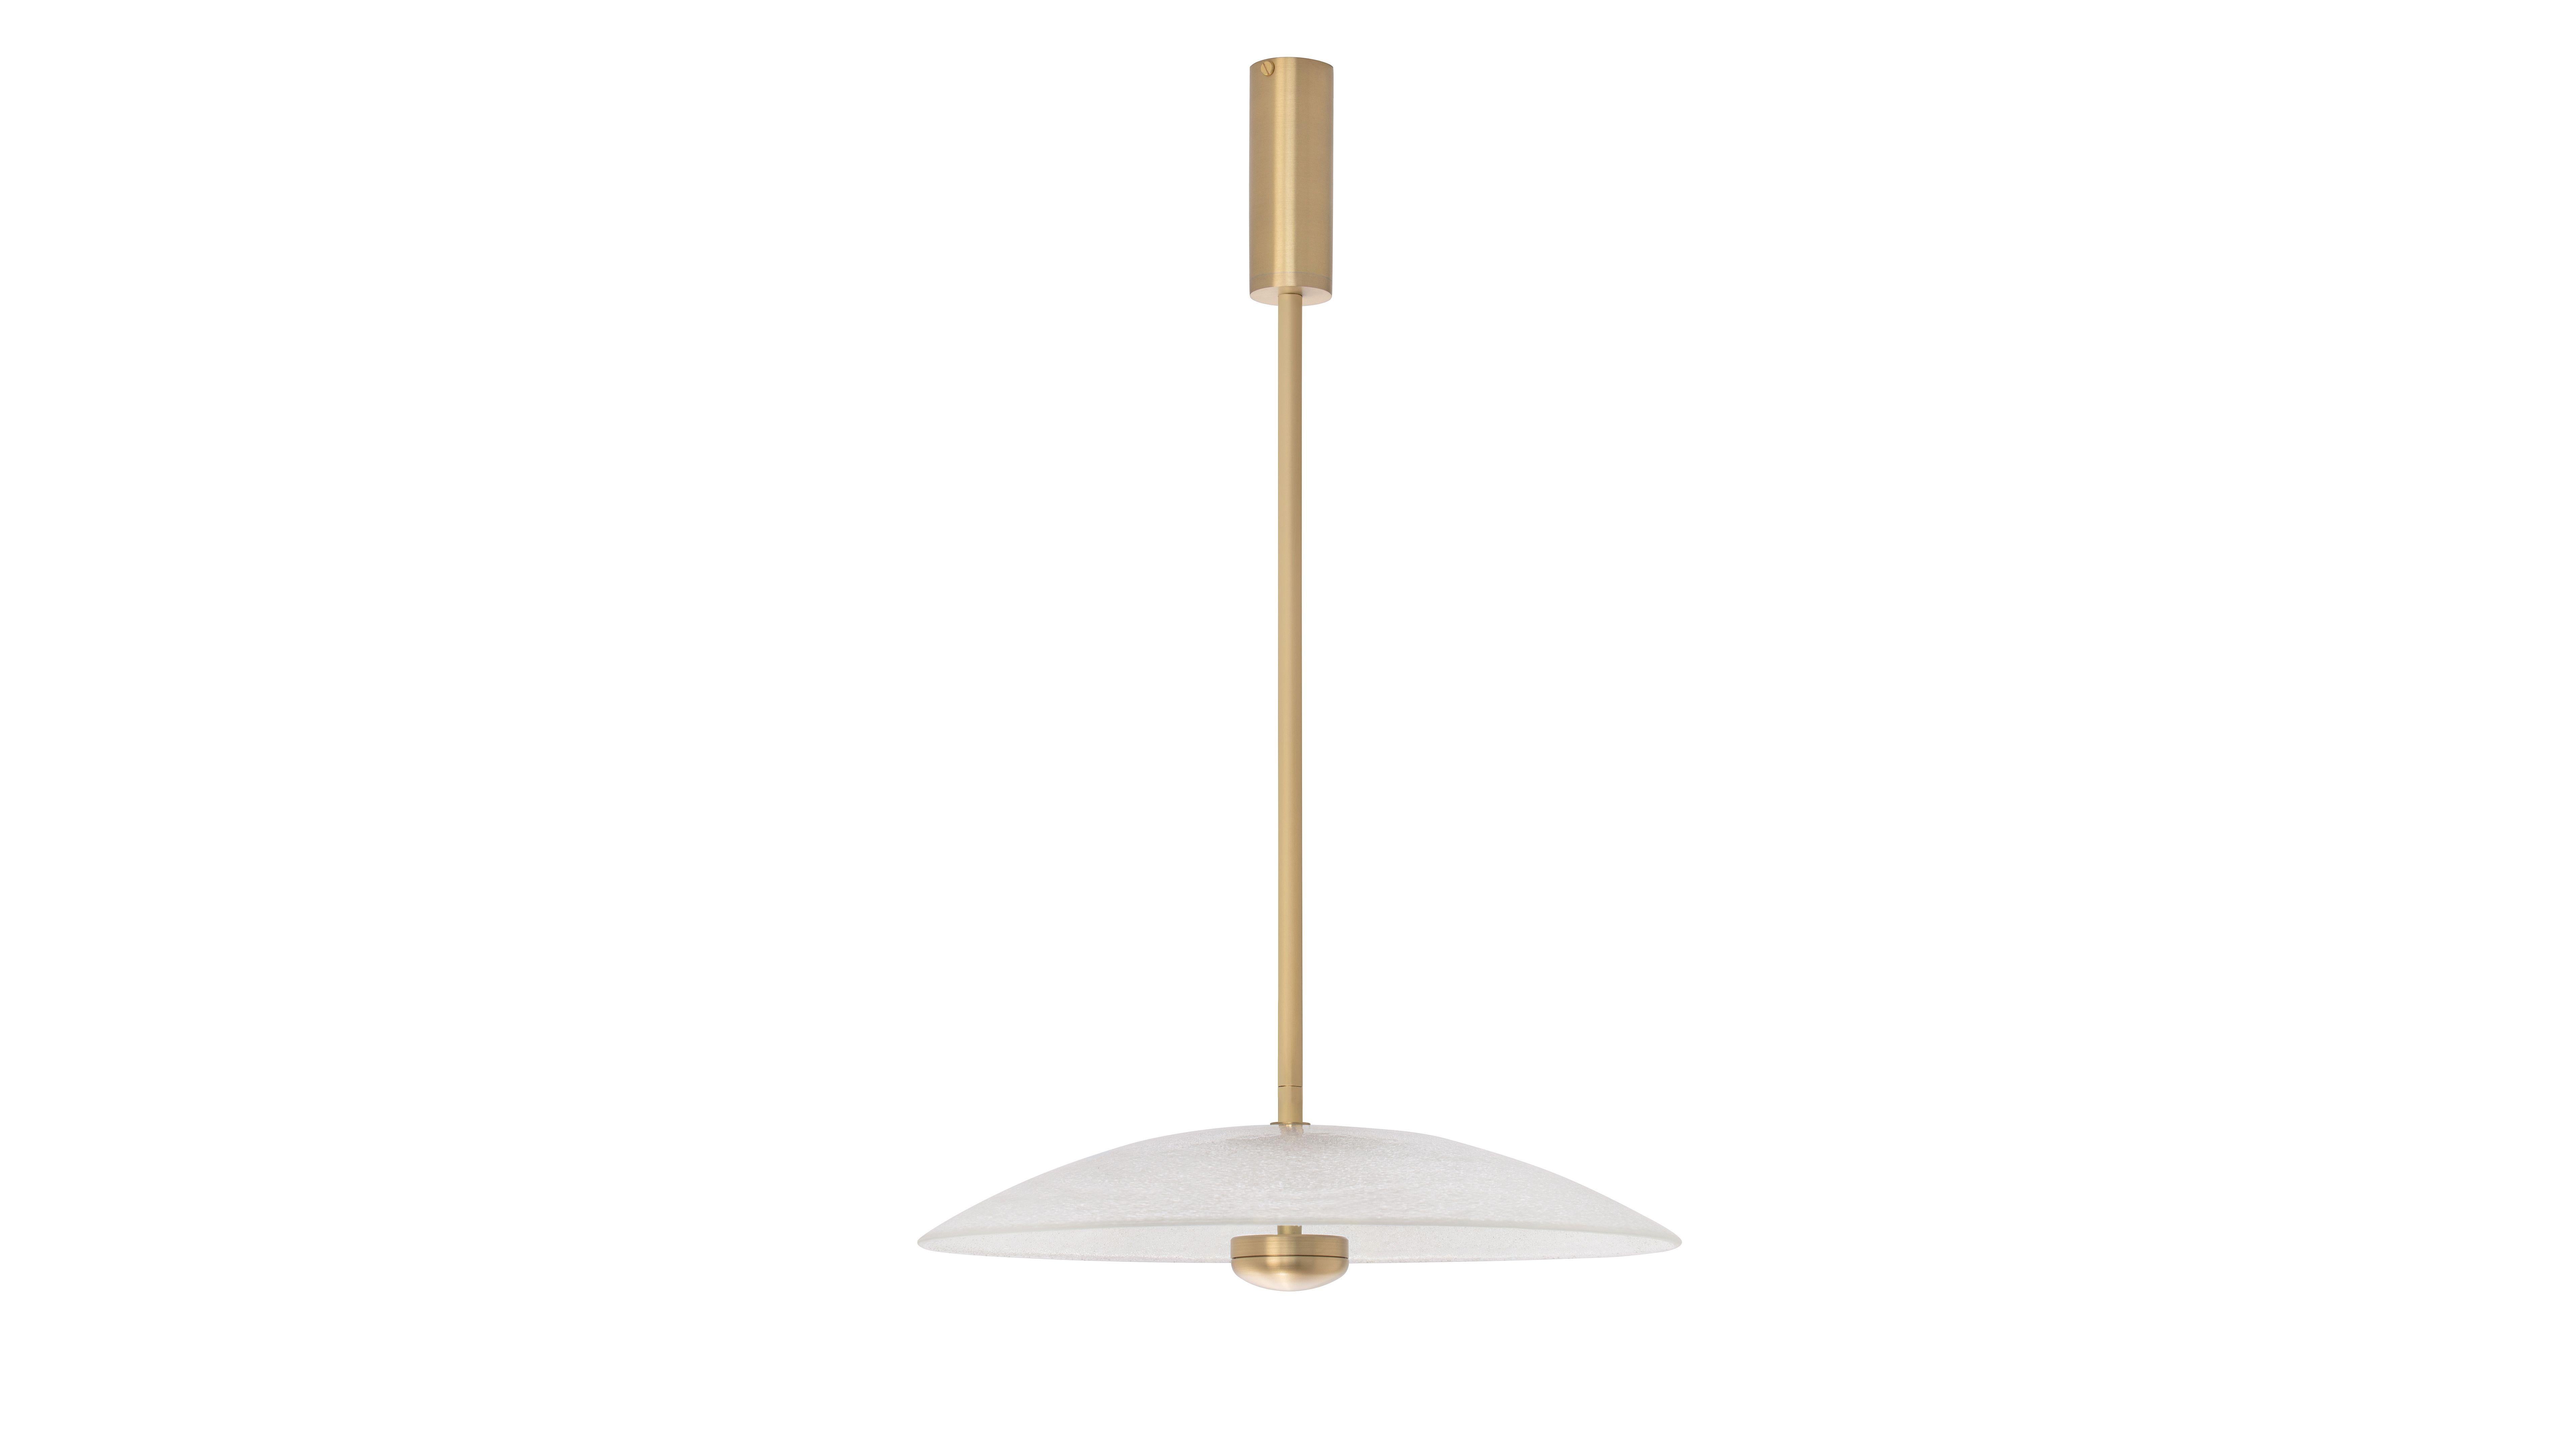 Brass Cielo large pendant by CTO Lighting
Materials: Satin brass with hand fritted glass
Dimensions: W 38.5 x D 38.5 x H 22.5 cm

Integrated LED - trailing dimmable - 8w - 2700k
weight 4.5kg (9.9lbs)
supplied with 1000mm drop rod
for